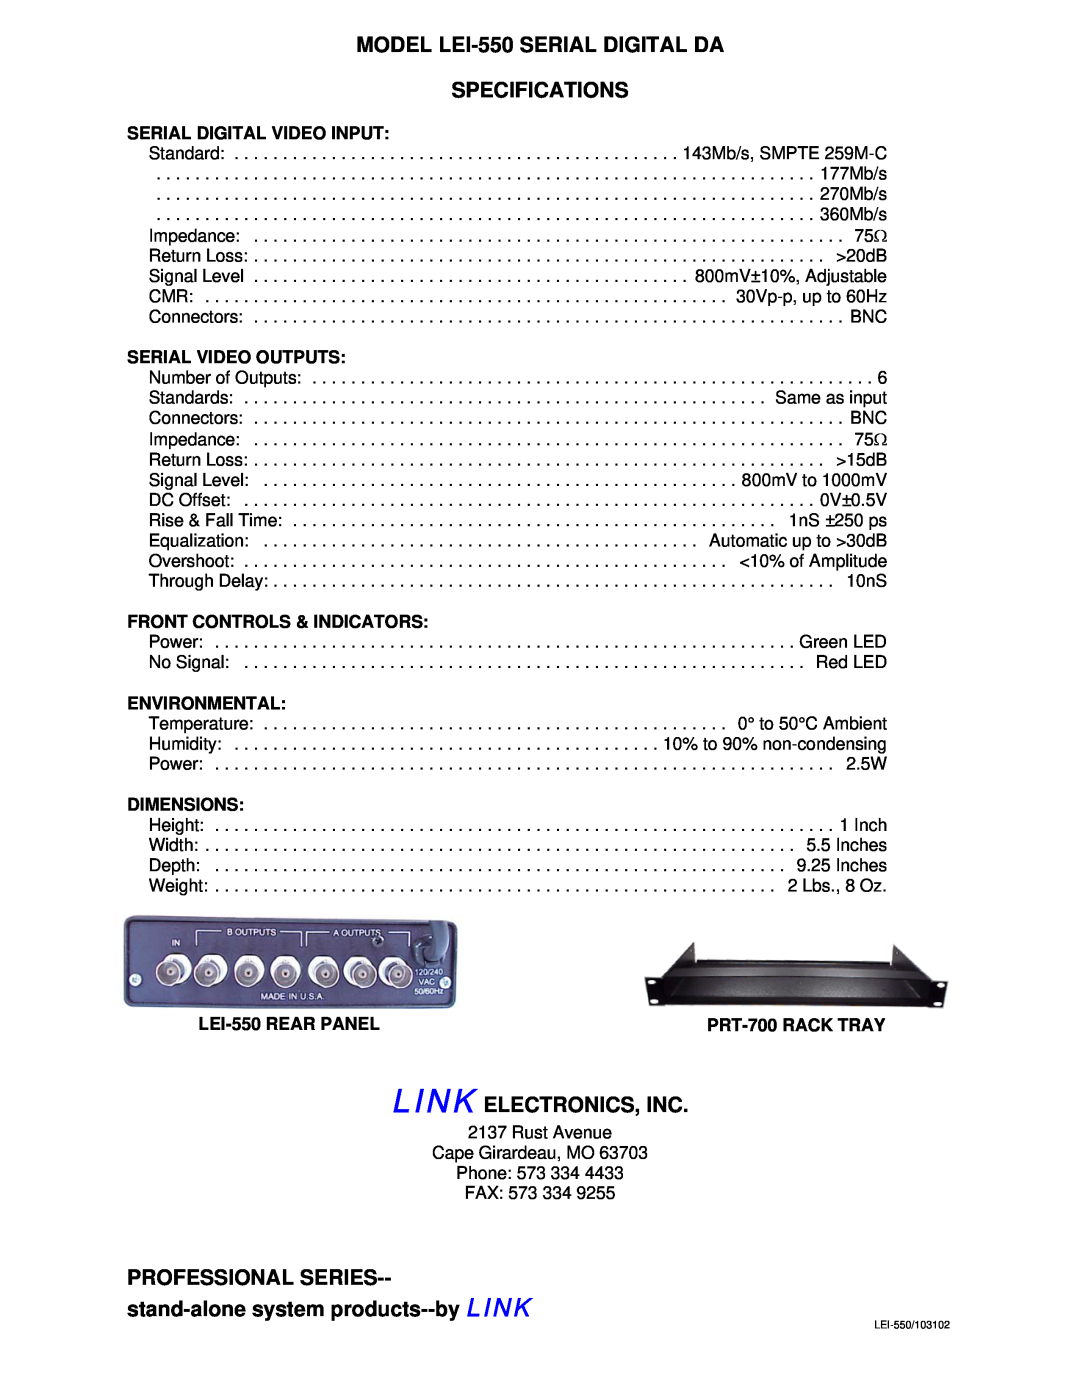 Link electronic LEI-550 manual Serial Digital Video Input, Serial Video Outputs, Front Controls & Indicators, Environmental 